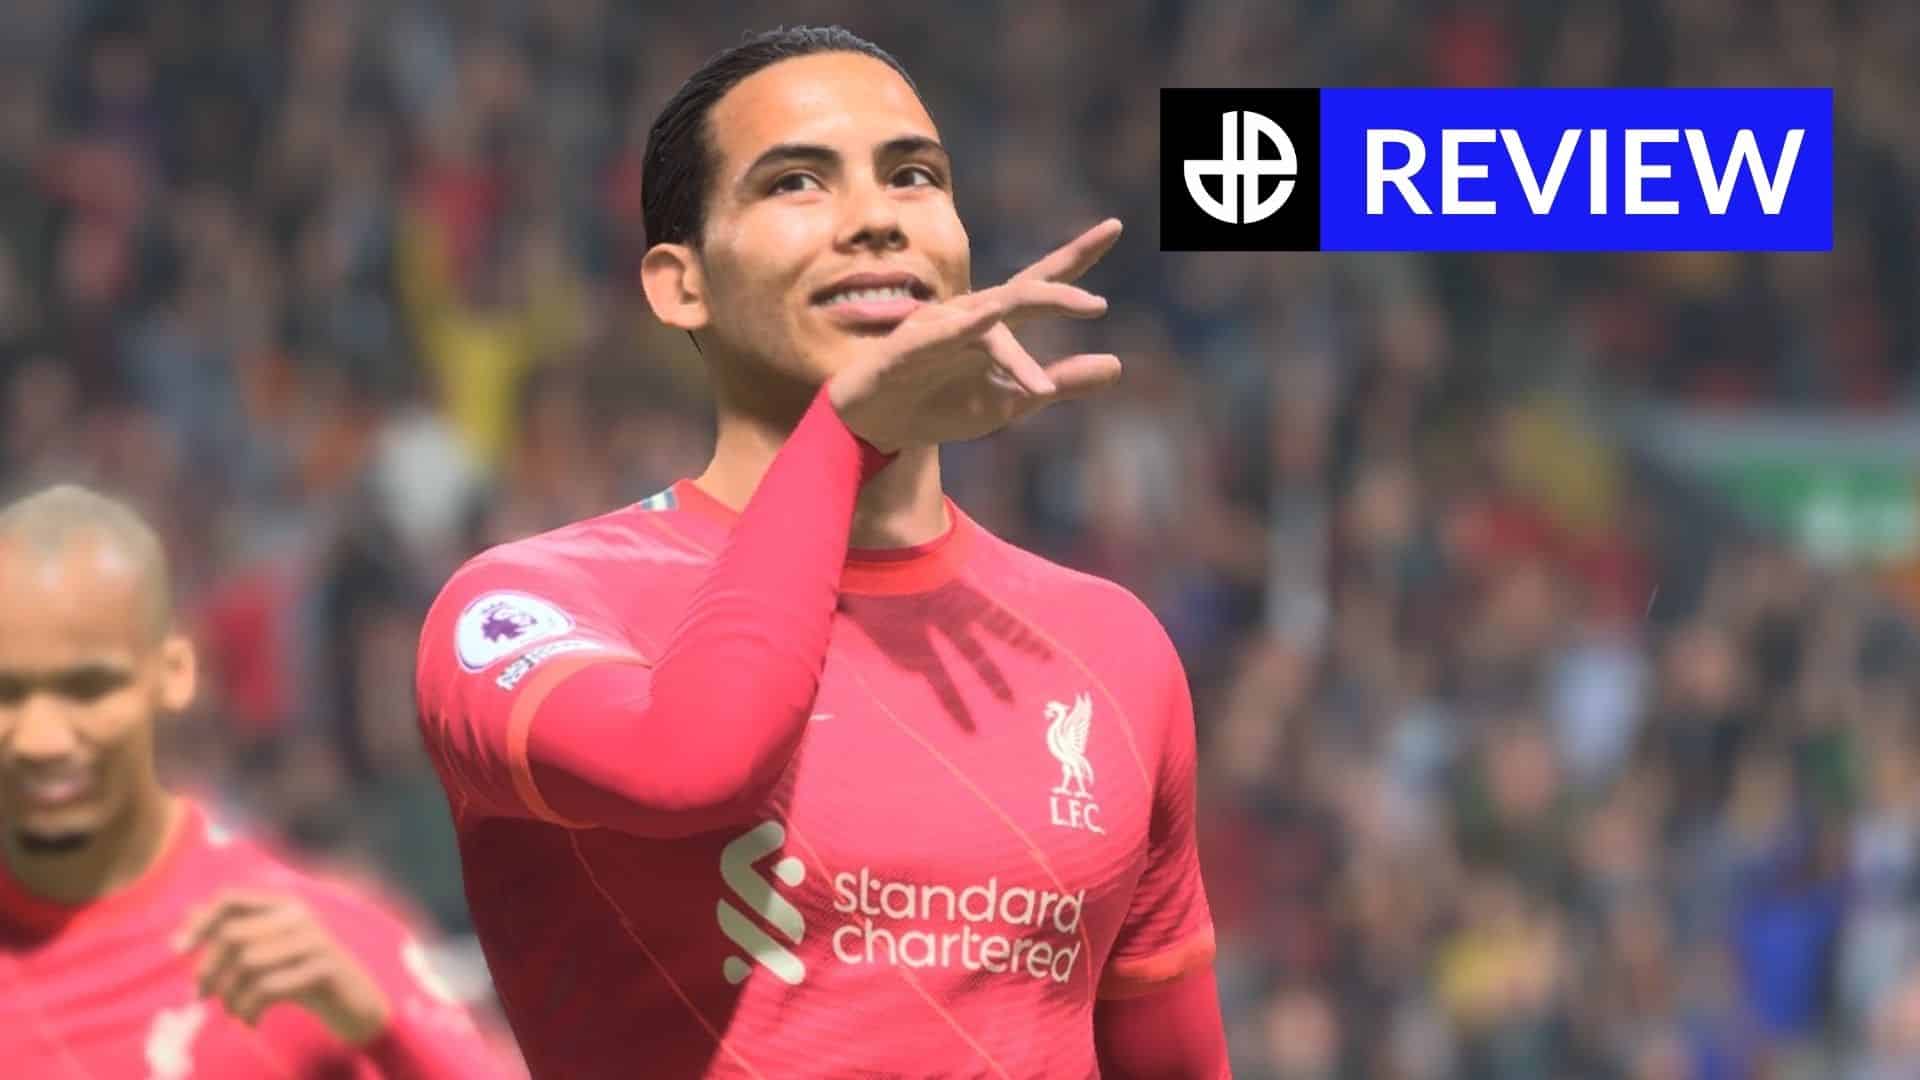 Everyone loved that  Ea developers of Fifa 22 reöeased a